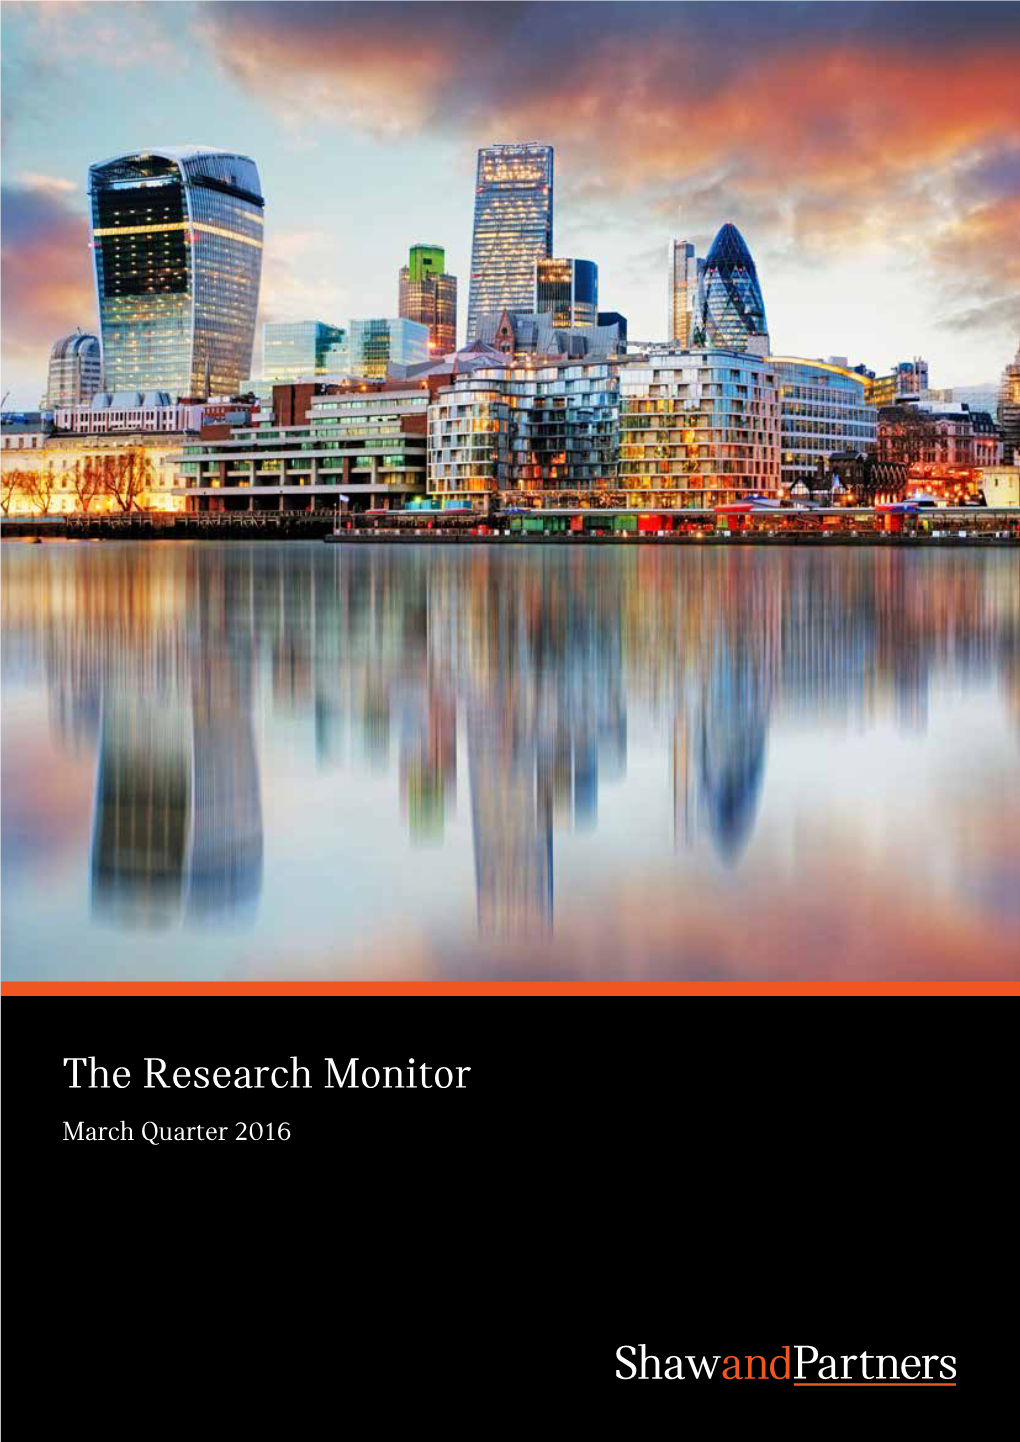 The Research Monitor March Quarter 2016 Content